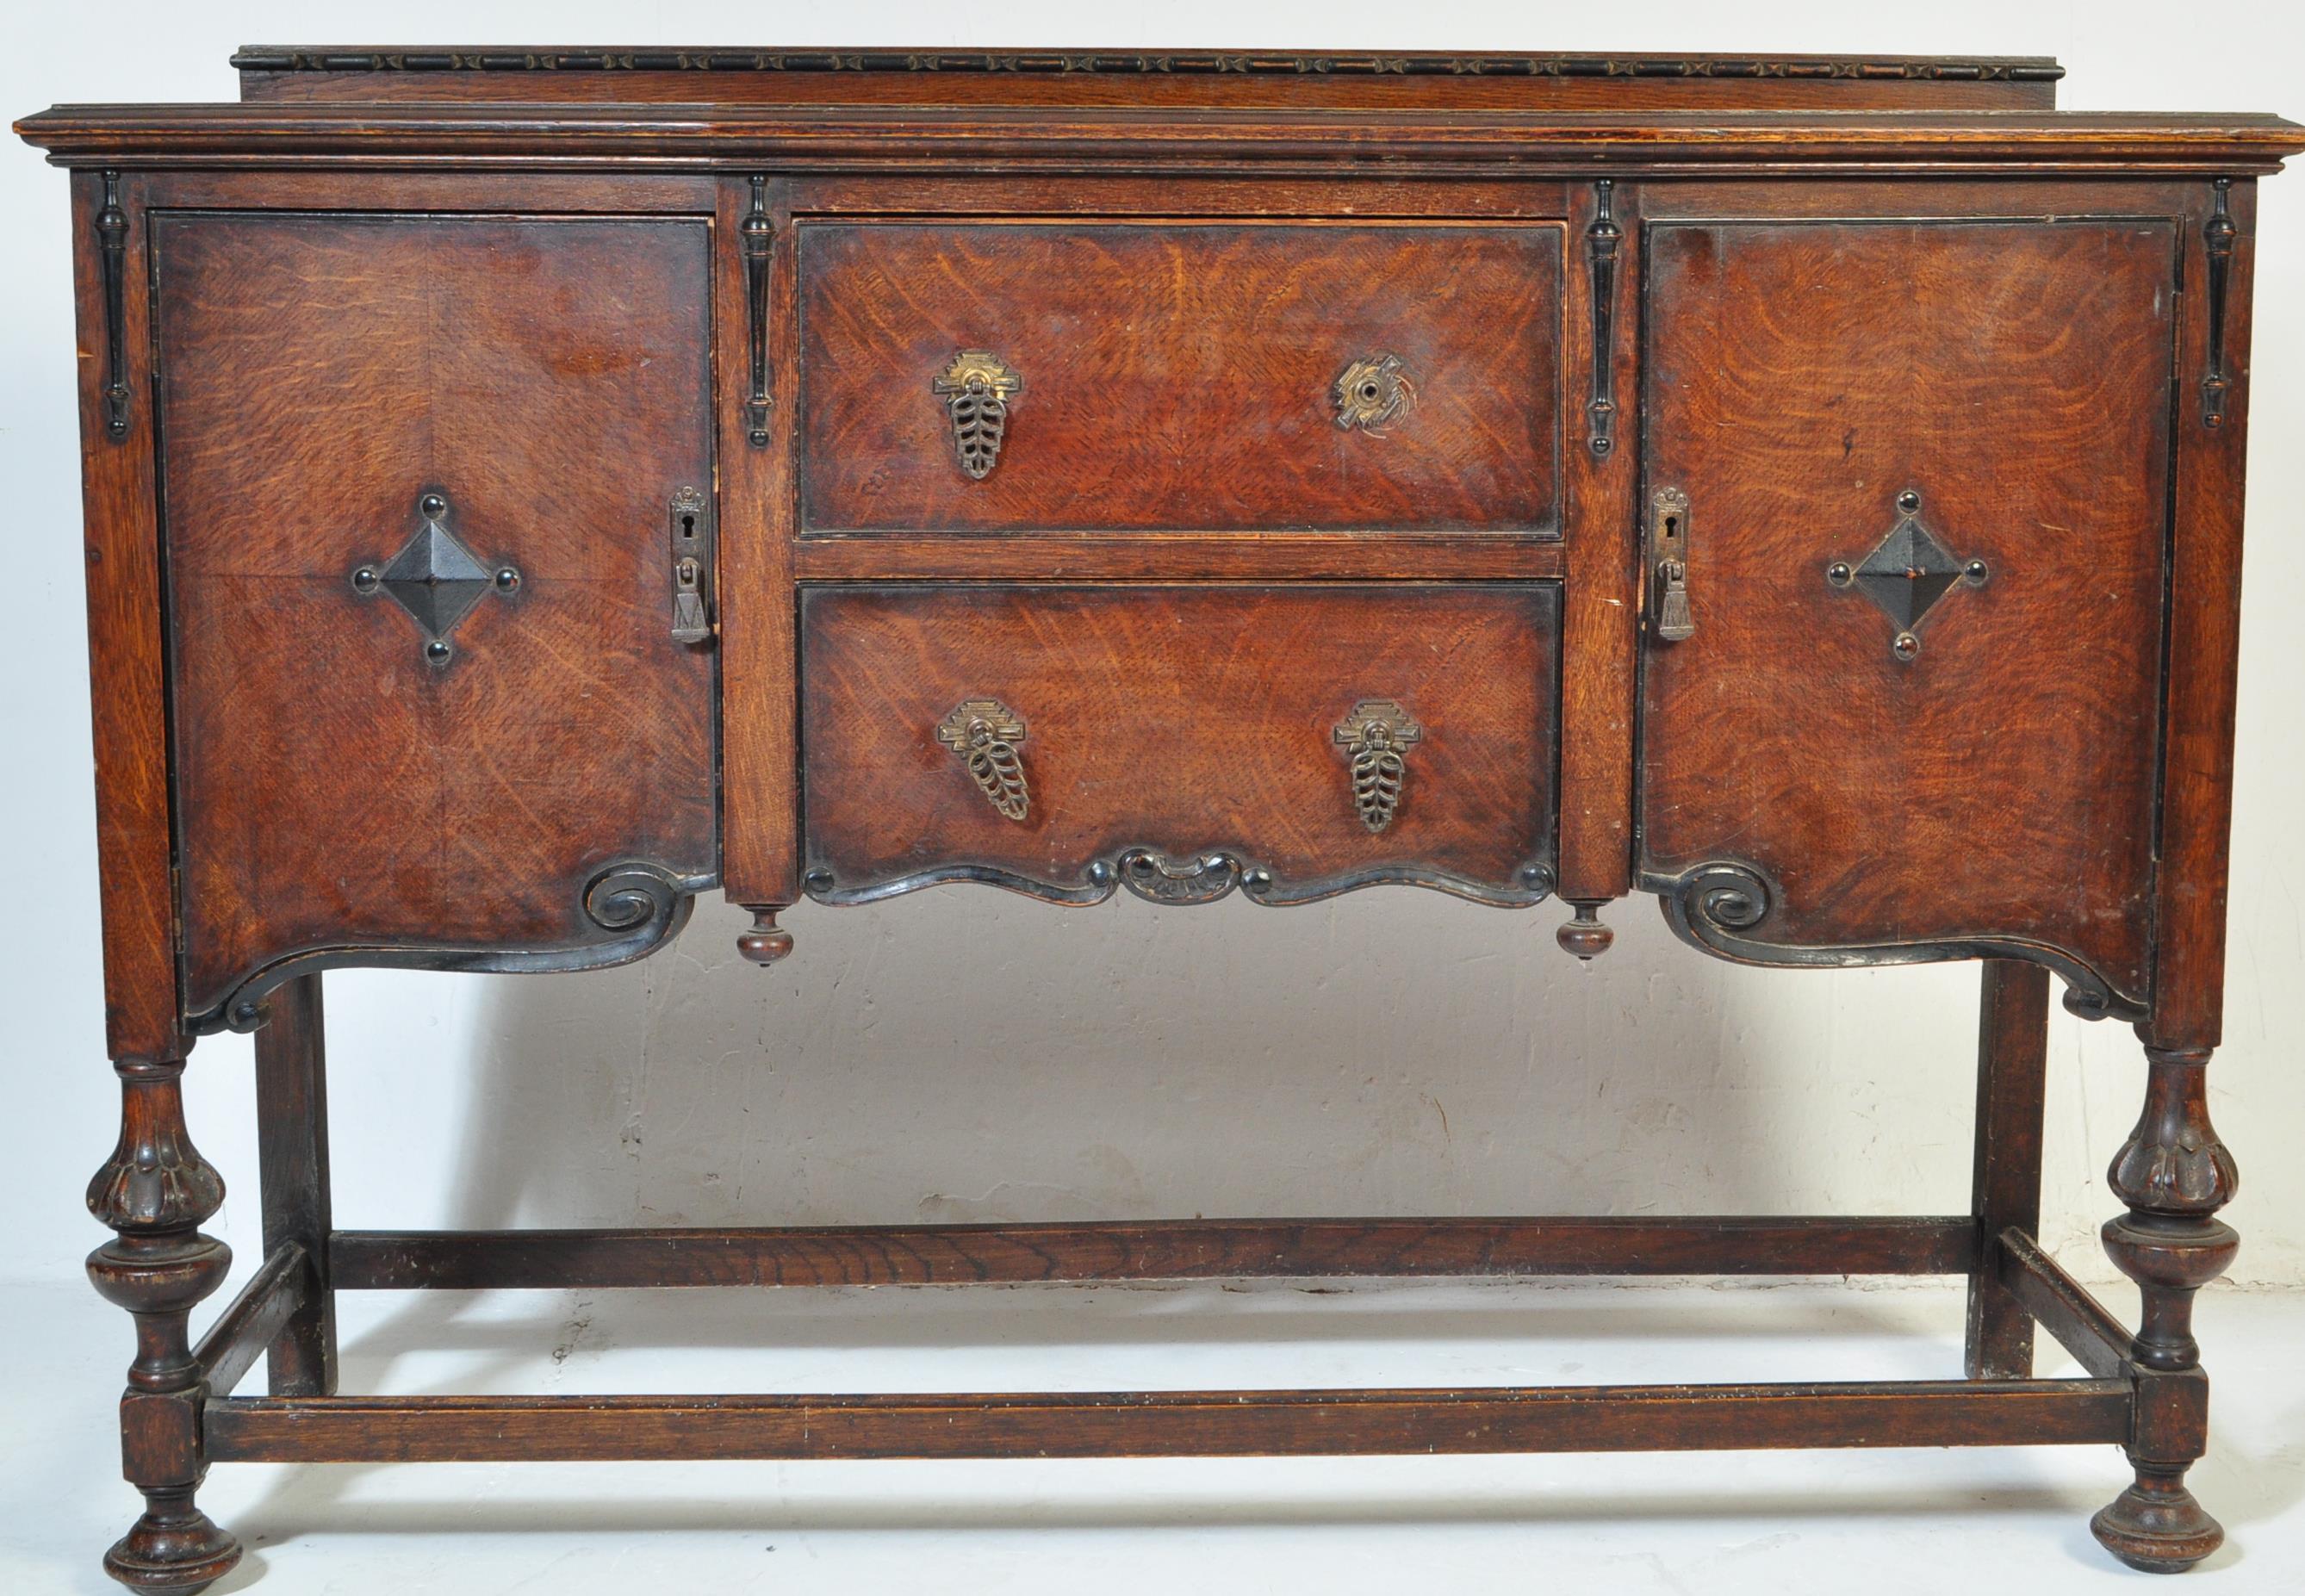 EARLY 20TH CENTURY JACOBEAN REVIVAL OAK SIDEBOARD CREDENZA - Image 3 of 5